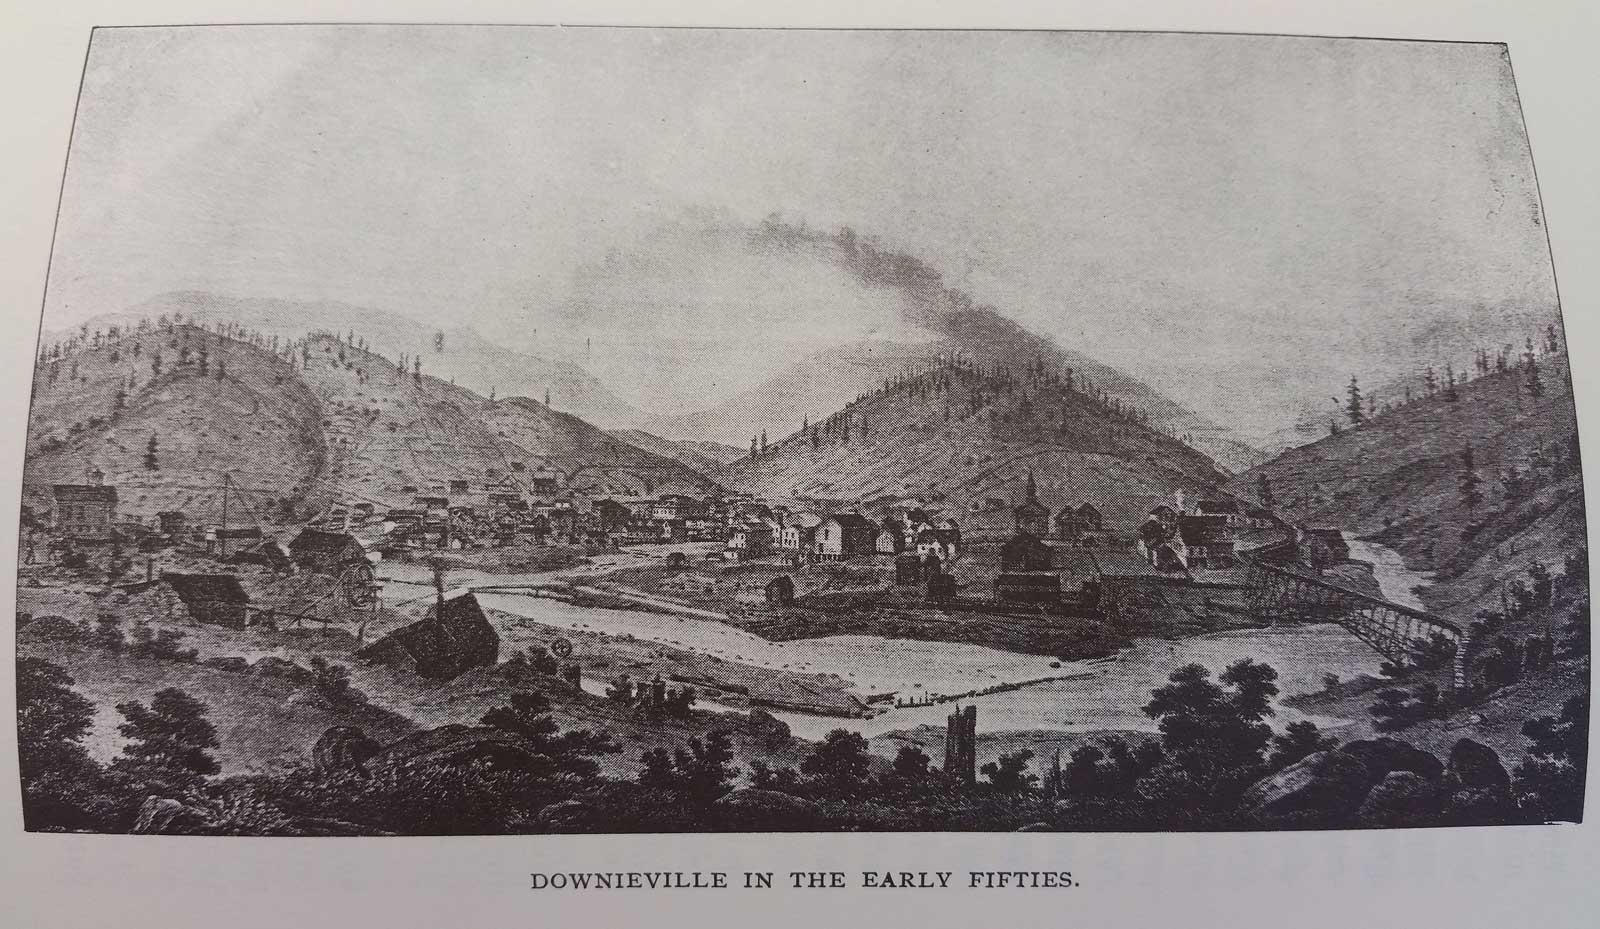 Downieville in the 1850's Illustration